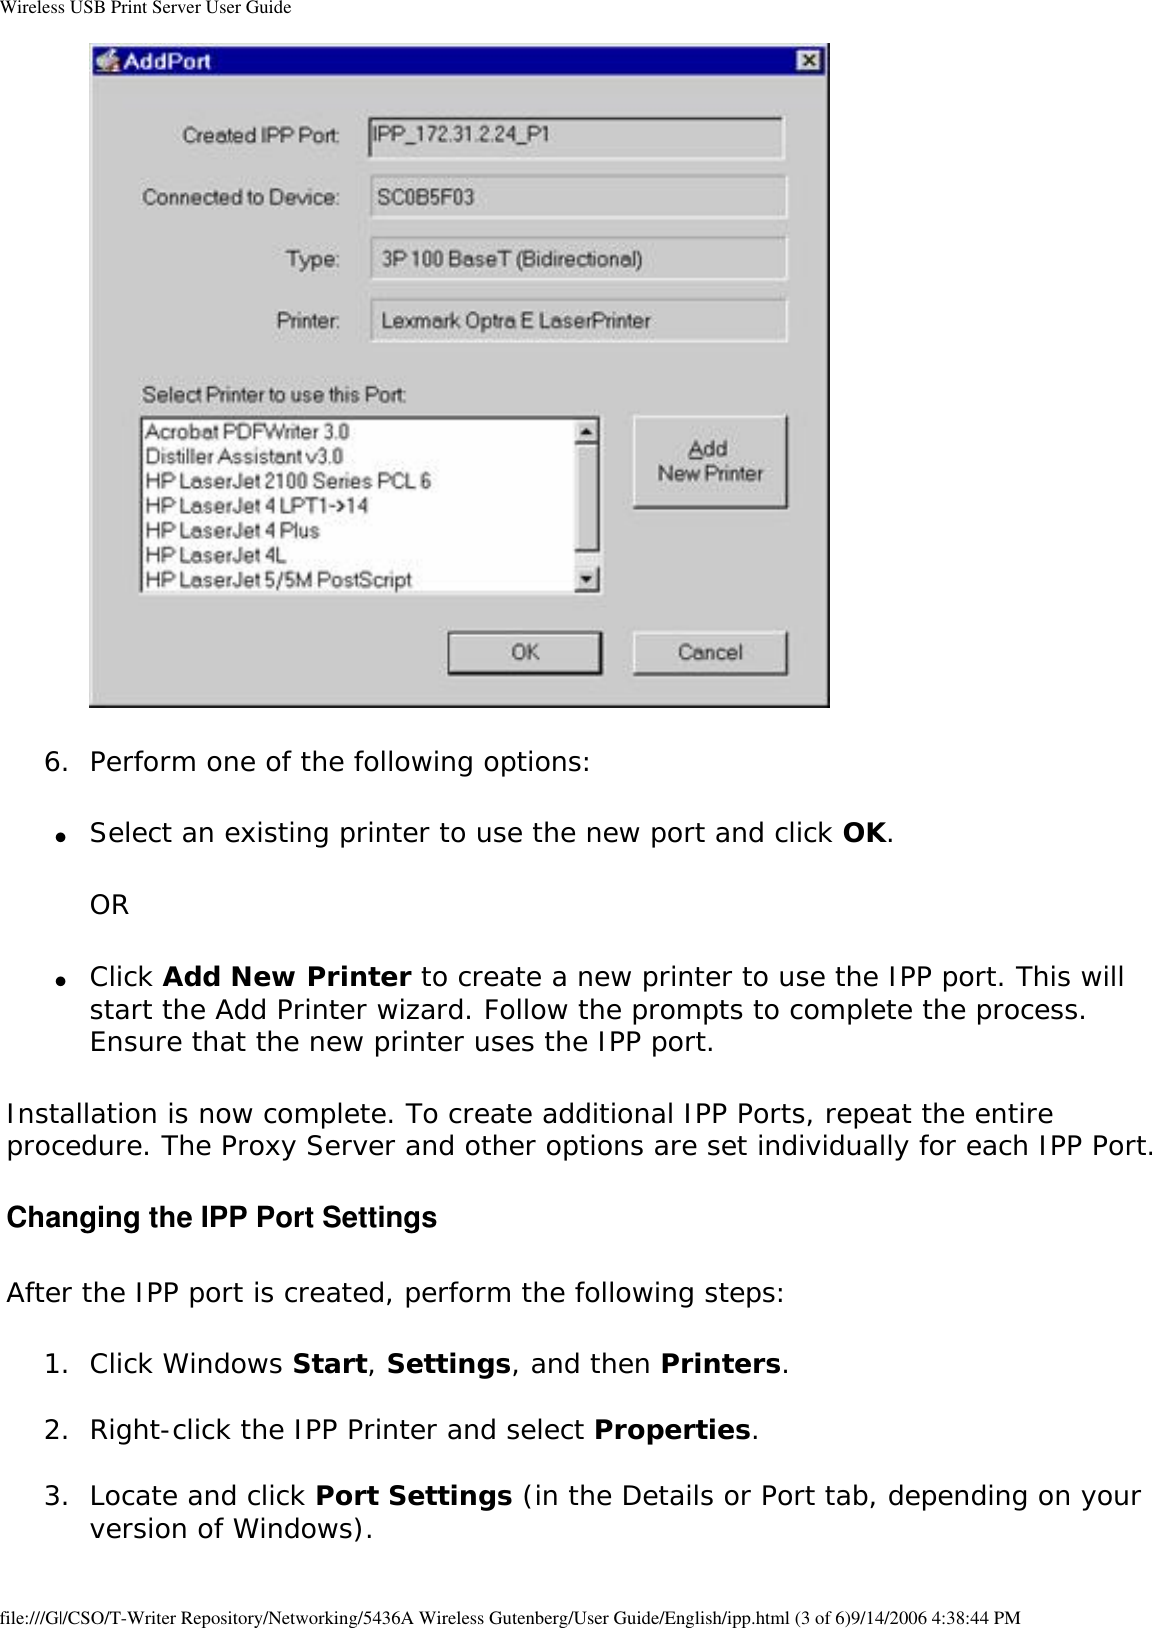 Wireless USB Print Server User Guide 6.  Perform one of the following options: ●     Select an existing printer to use the new port and click OK. OR●     Click Add New Printer to create a new printer to use the IPP port. This will start the Add Printer wizard. Follow the prompts to complete the process. Ensure that the new printer uses the IPP port. Installation is now complete. To create additional IPP Ports, repeat the entire procedure. The Proxy Server and other options are set individually for each IPP Port.Changing the IPP Port SettingsAfter the IPP port is created, perform the following steps:1.  Click Windows Start, Settings, and then Printers. 2.  Right-click the IPP Printer and select Properties. 3.  Locate and click Port Settings (in the Details or Port tab, depending on your version of Windows). file:///G|/CSO/T-Writer Repository/Networking/5436A Wireless Gutenberg/User Guide/English/ipp.html (3 of 6)9/14/2006 4:38:44 PM